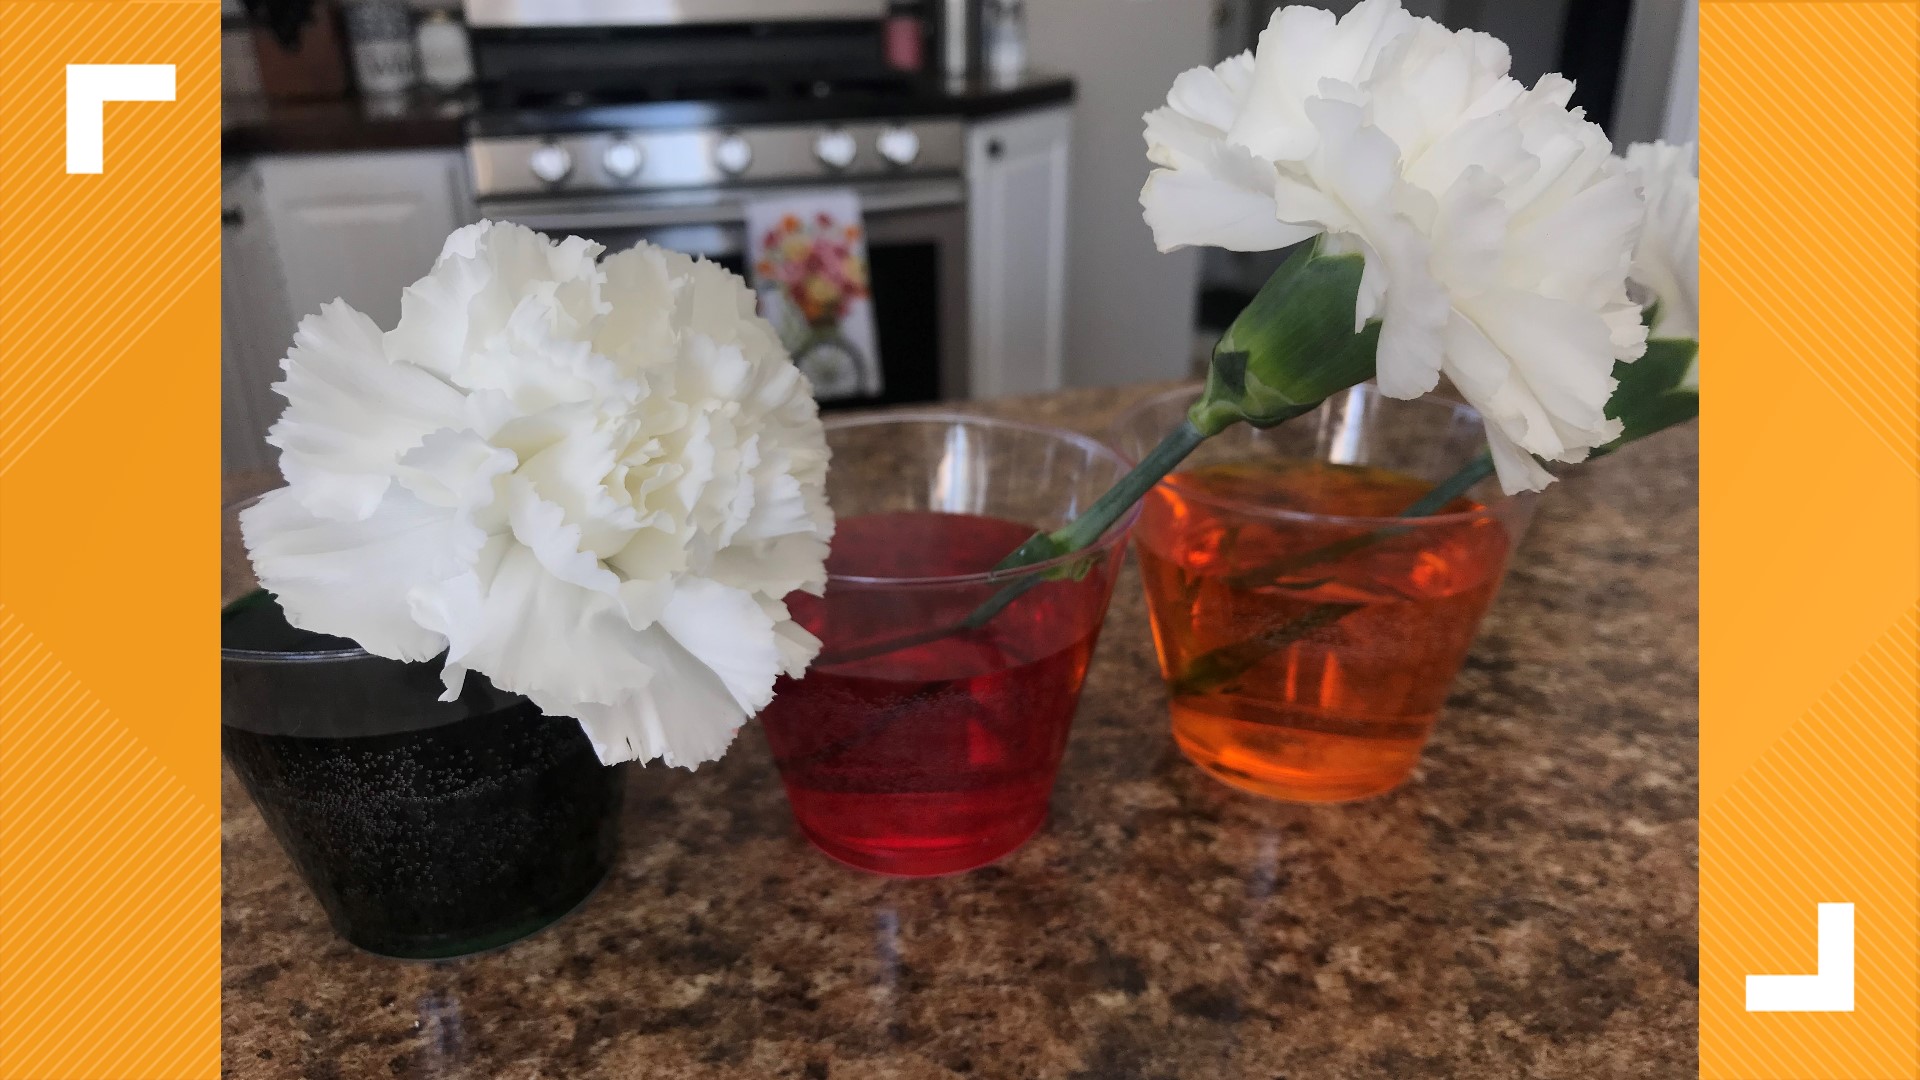 Make a colorful flower bouquet for mom using science